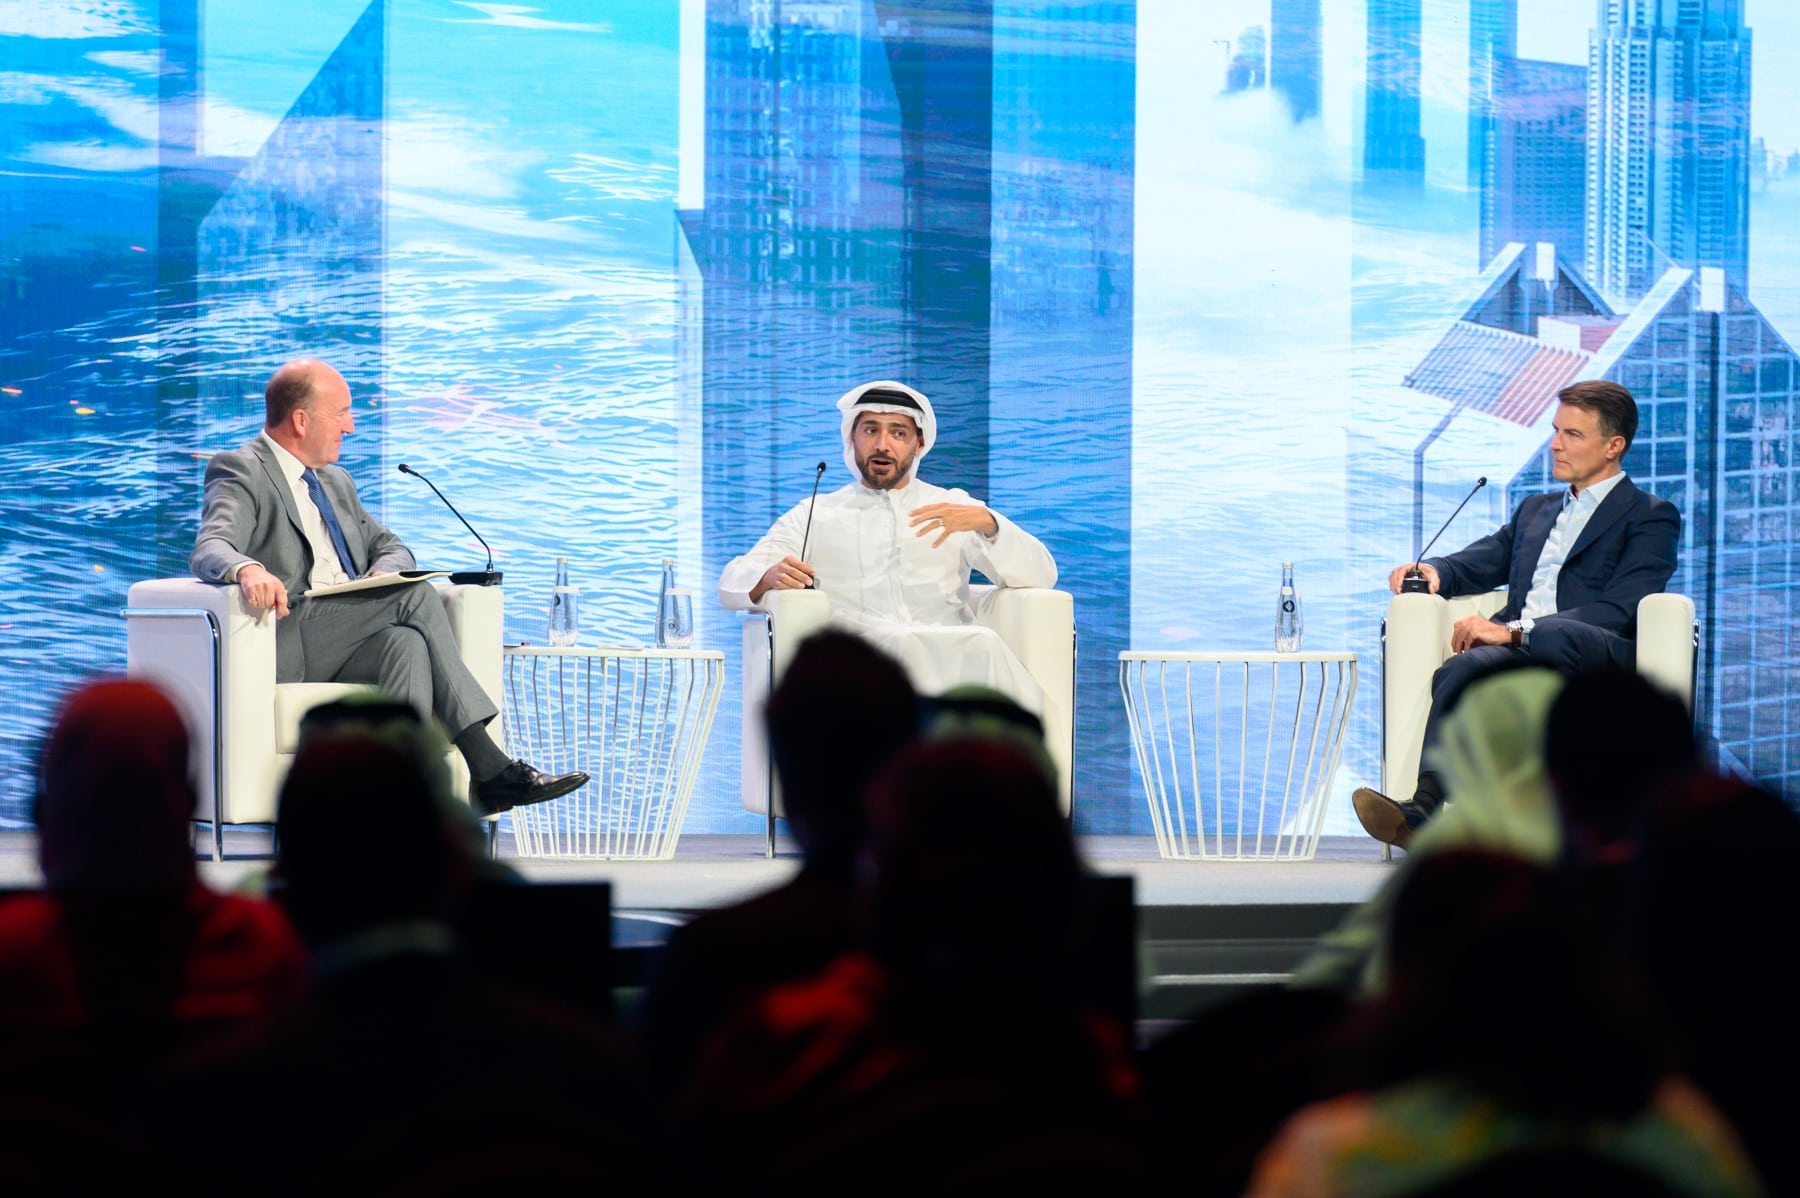 DUBAI BUSINESS FORUM EXPLORES THE ROLE OF ADVANCED TECHNOLOGY IN TRANSFORMING BUSINESS AND THE CHANGING FACE OF THE WORKFORCE